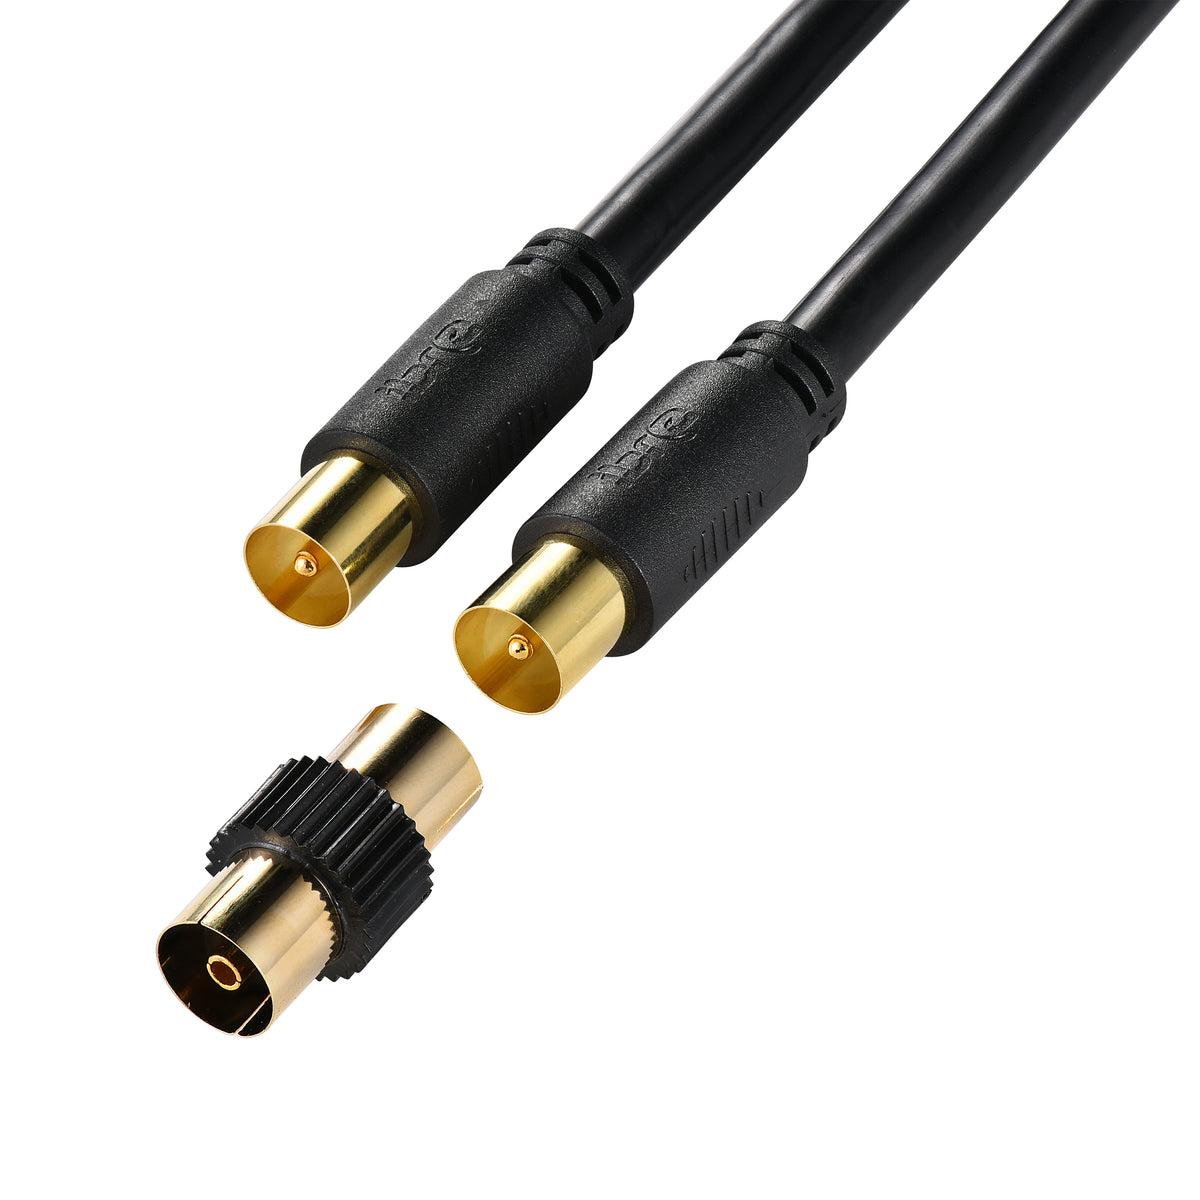 IBRA Aerial Coaxial Cable 3M with Gold-Plated Connectors, Male to Male RF Coax Lead with Female Adapter Coupler for Freeview, Freesat, Sky, Virgin, BT, You View, Satellite TV - Black